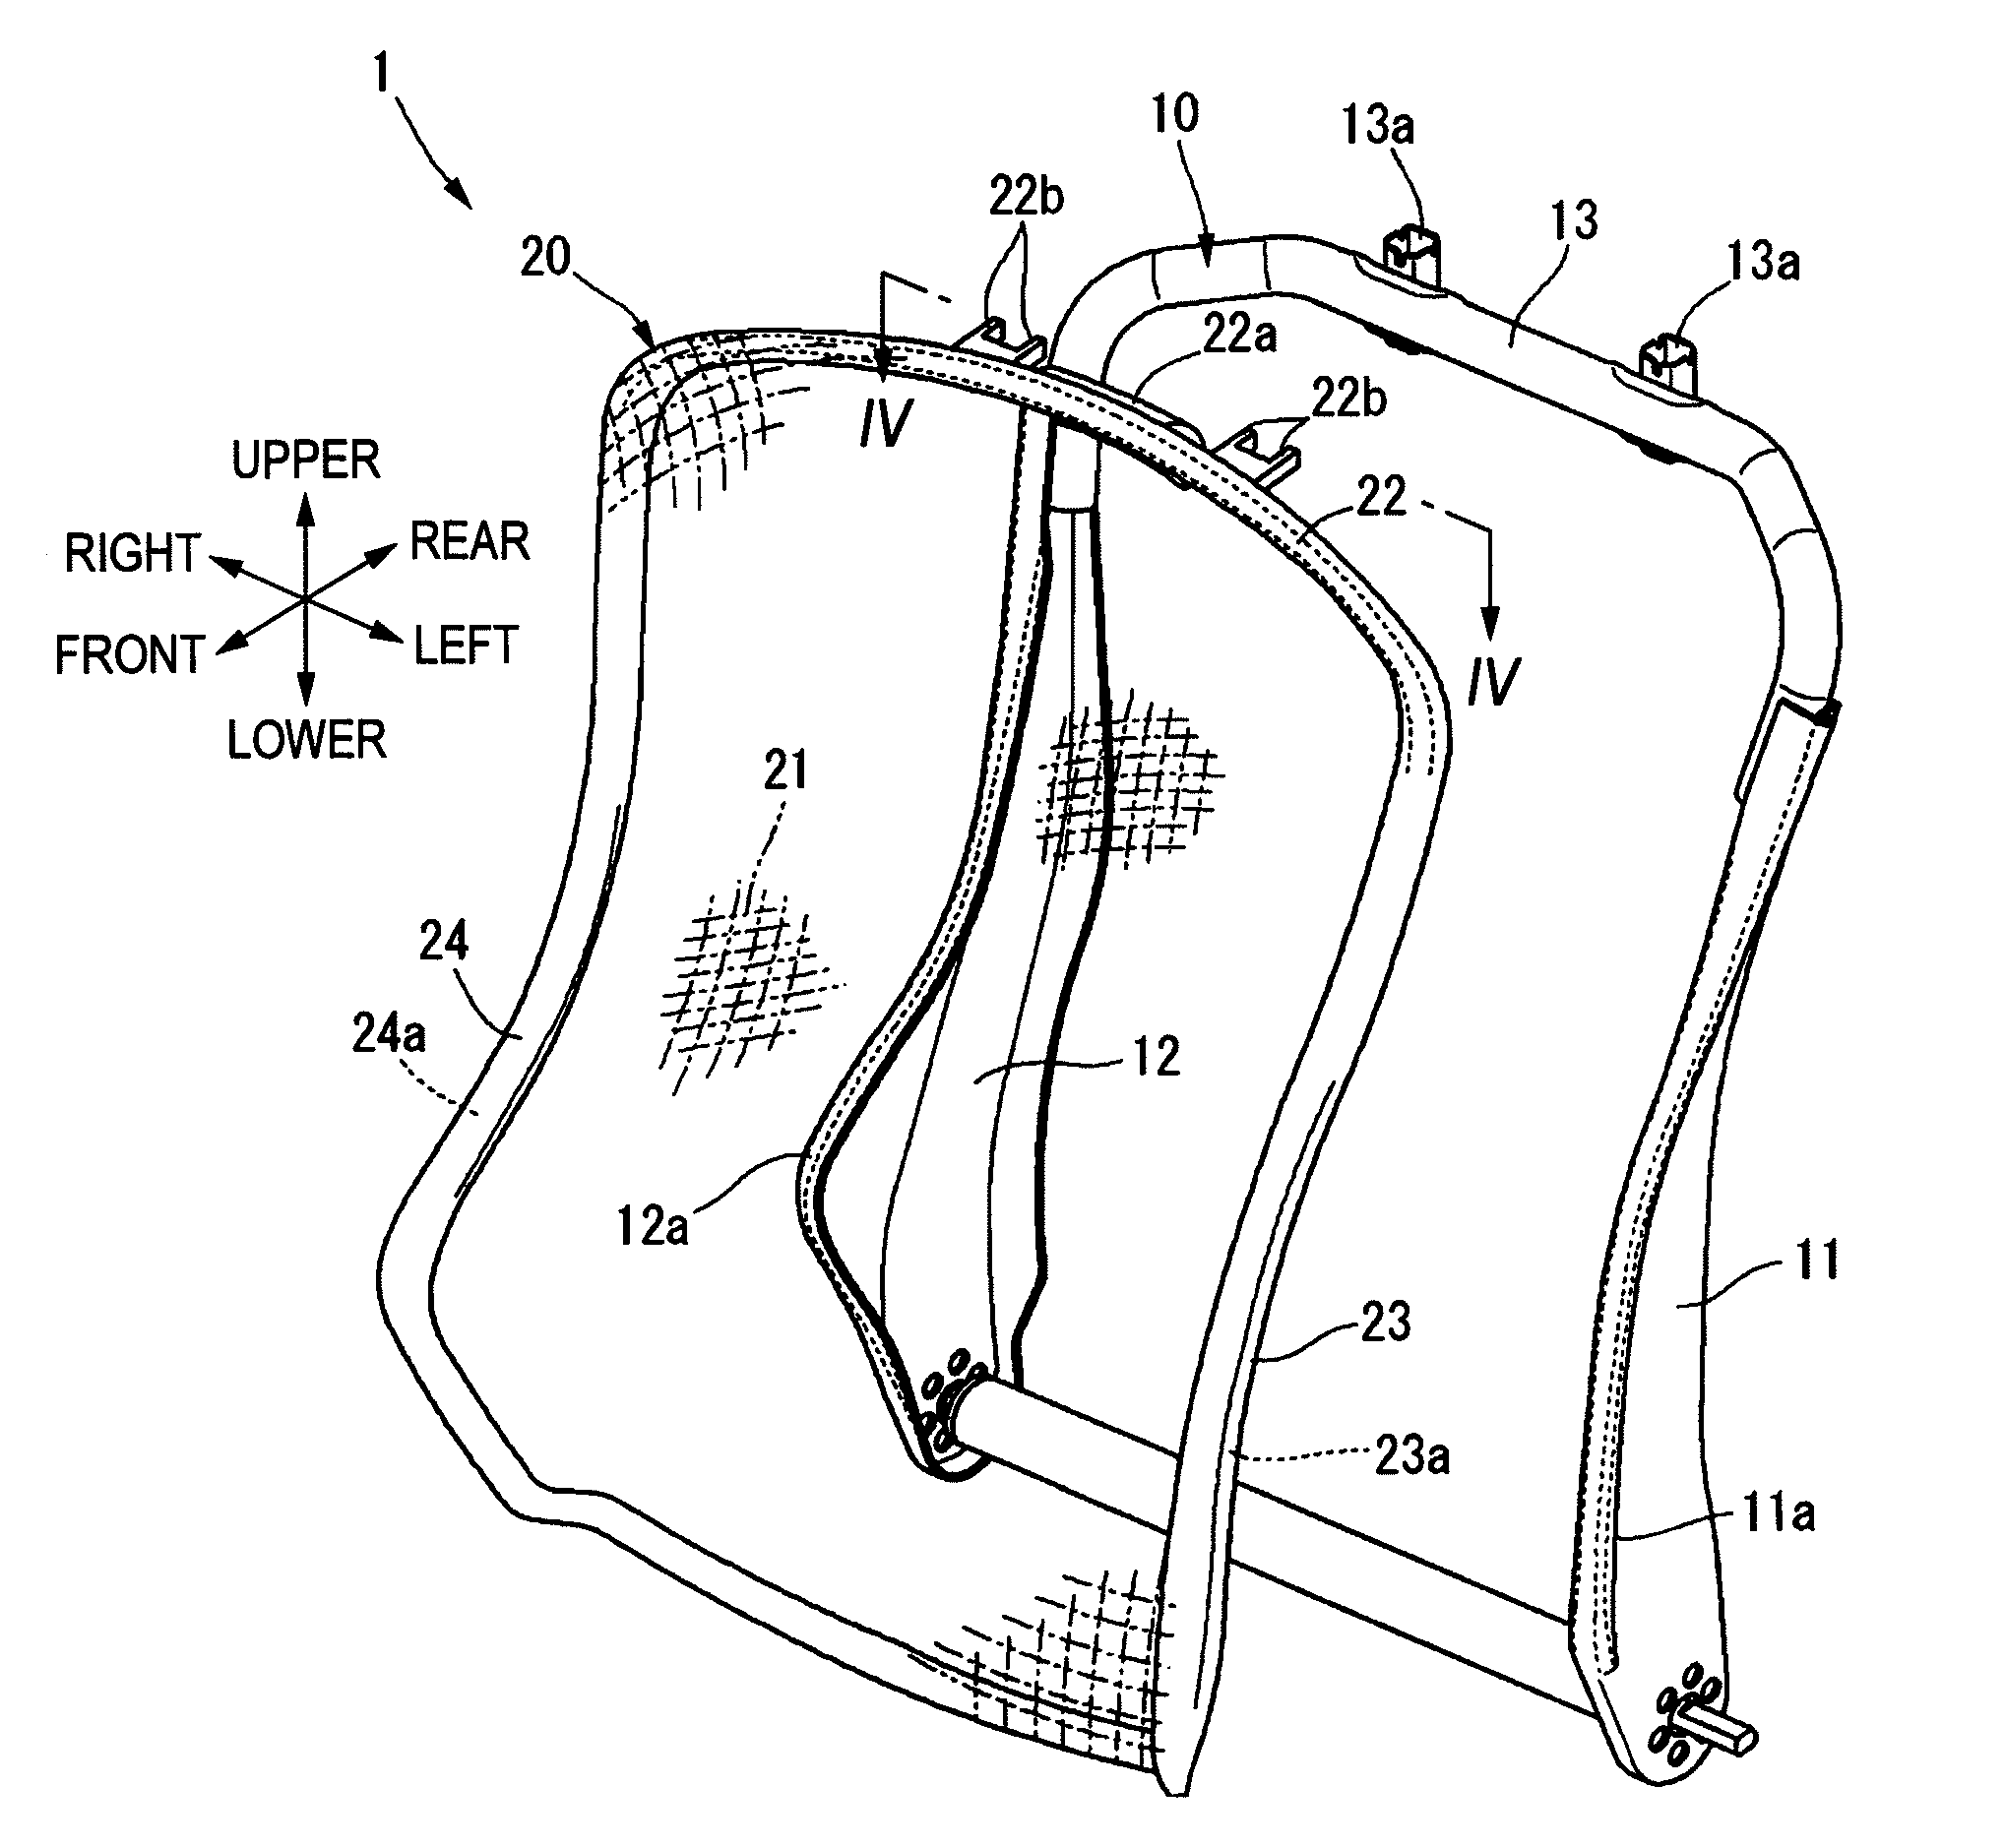 Assembling structure of planar elastic body of vehicle seat